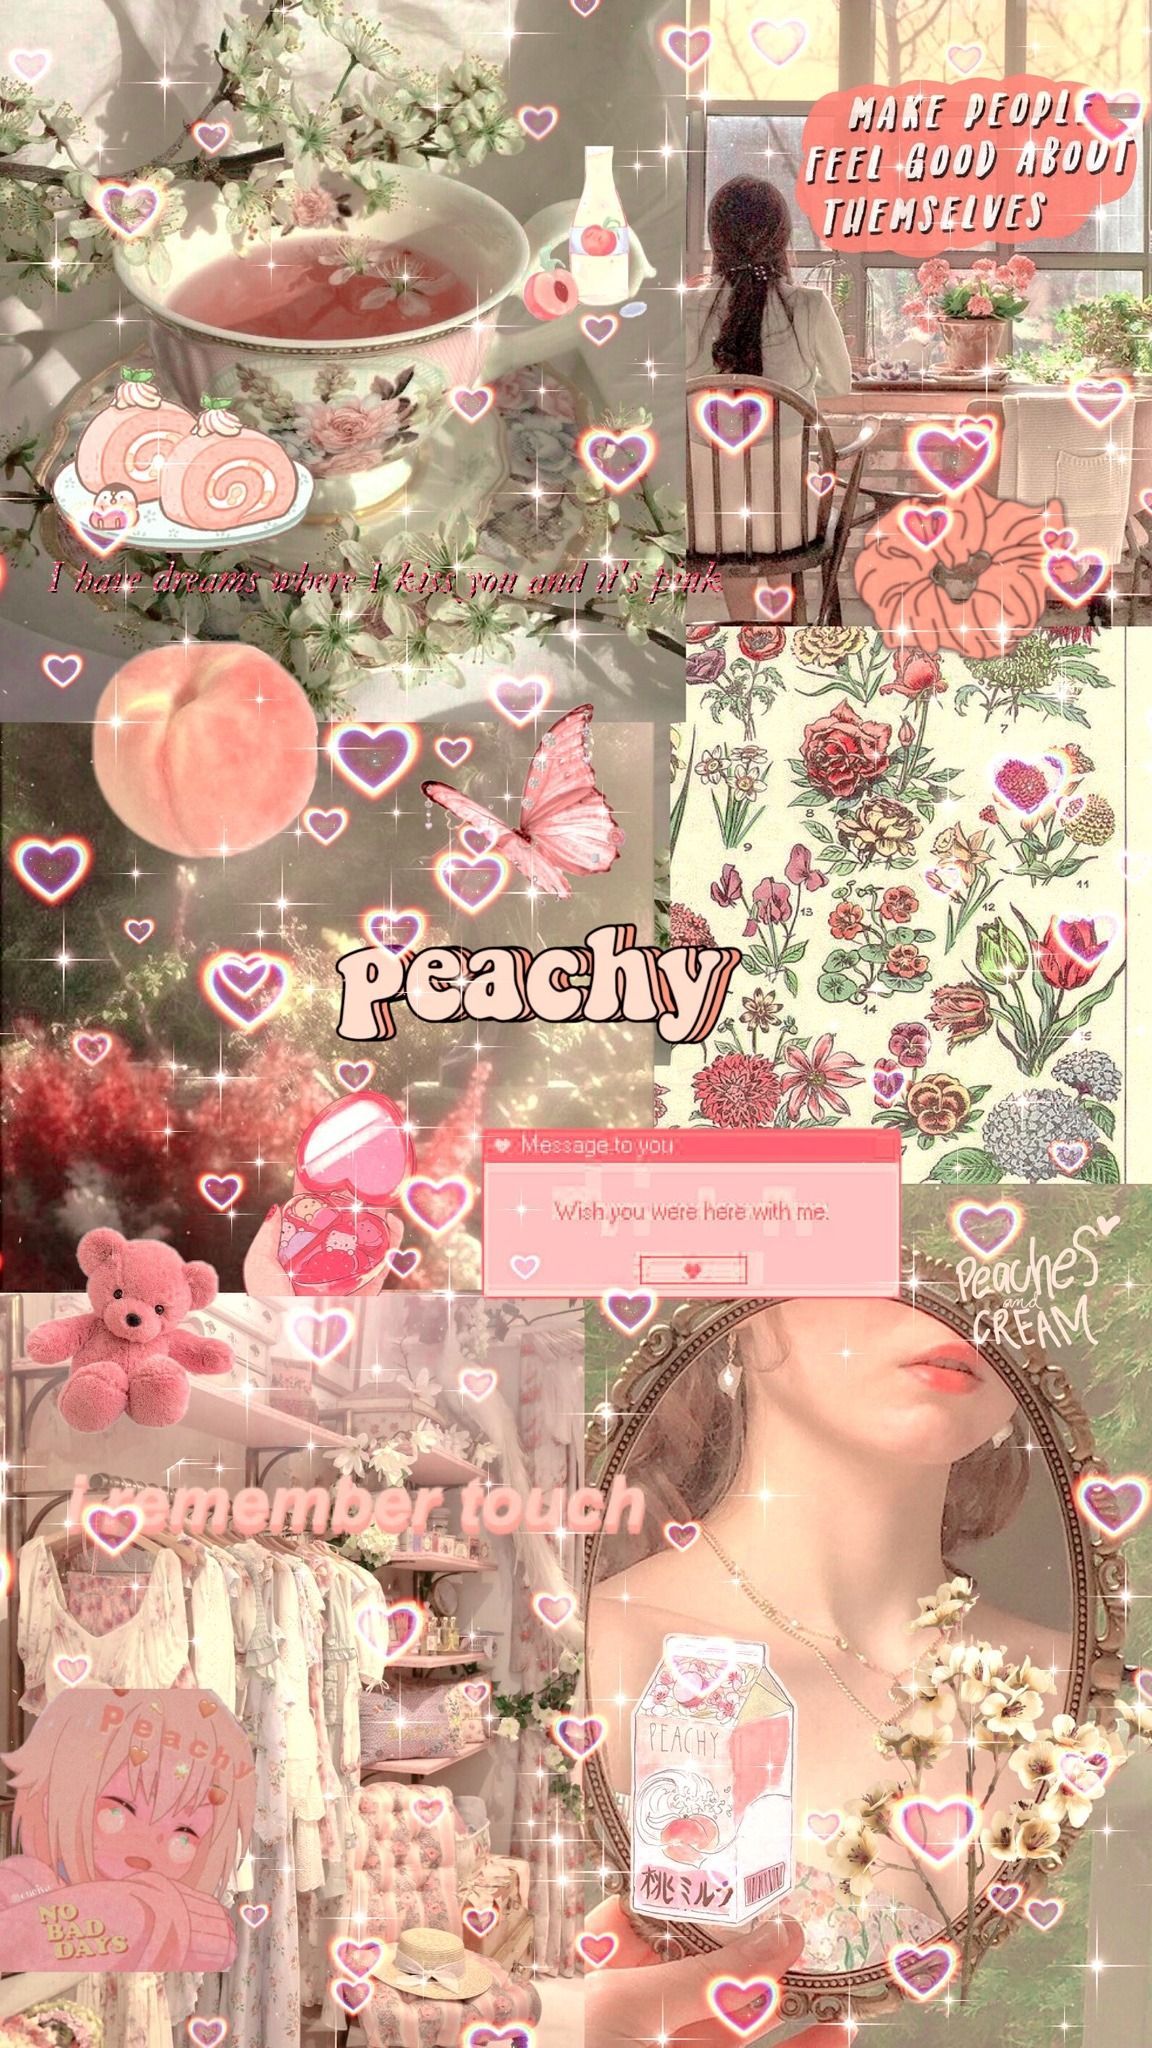 A collage of pictures with pink and white flowers - Pink phone, pink collage